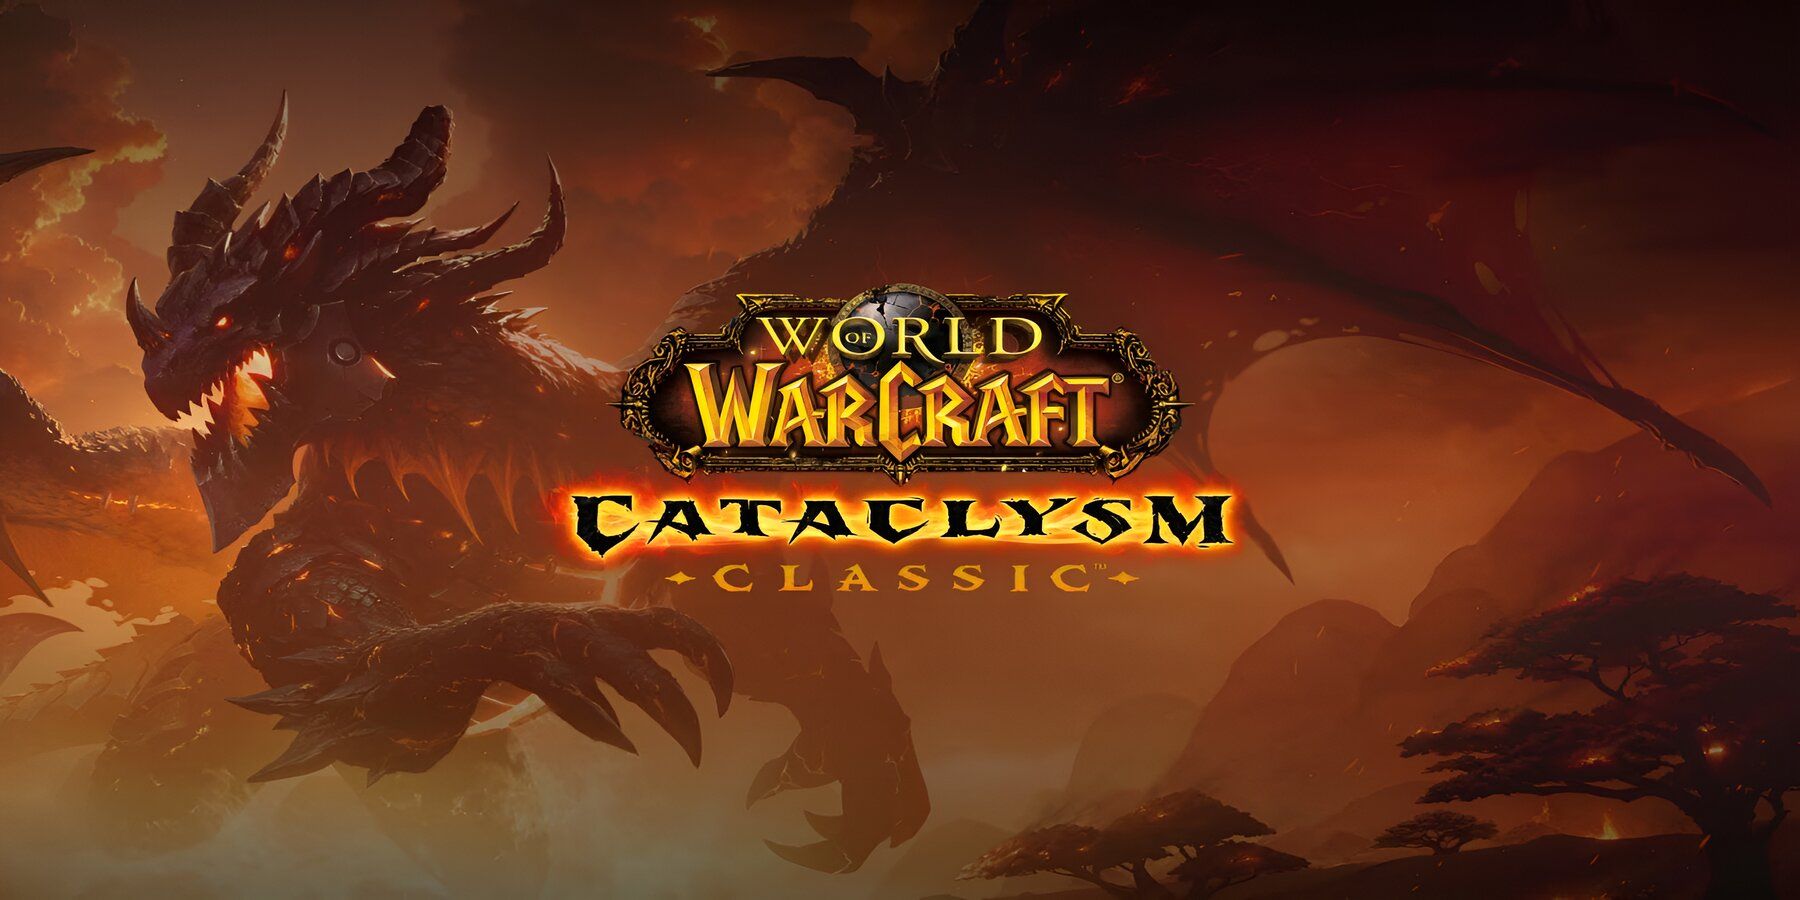 world-of-warcraft-cataclysm classic logo with deathwing in background